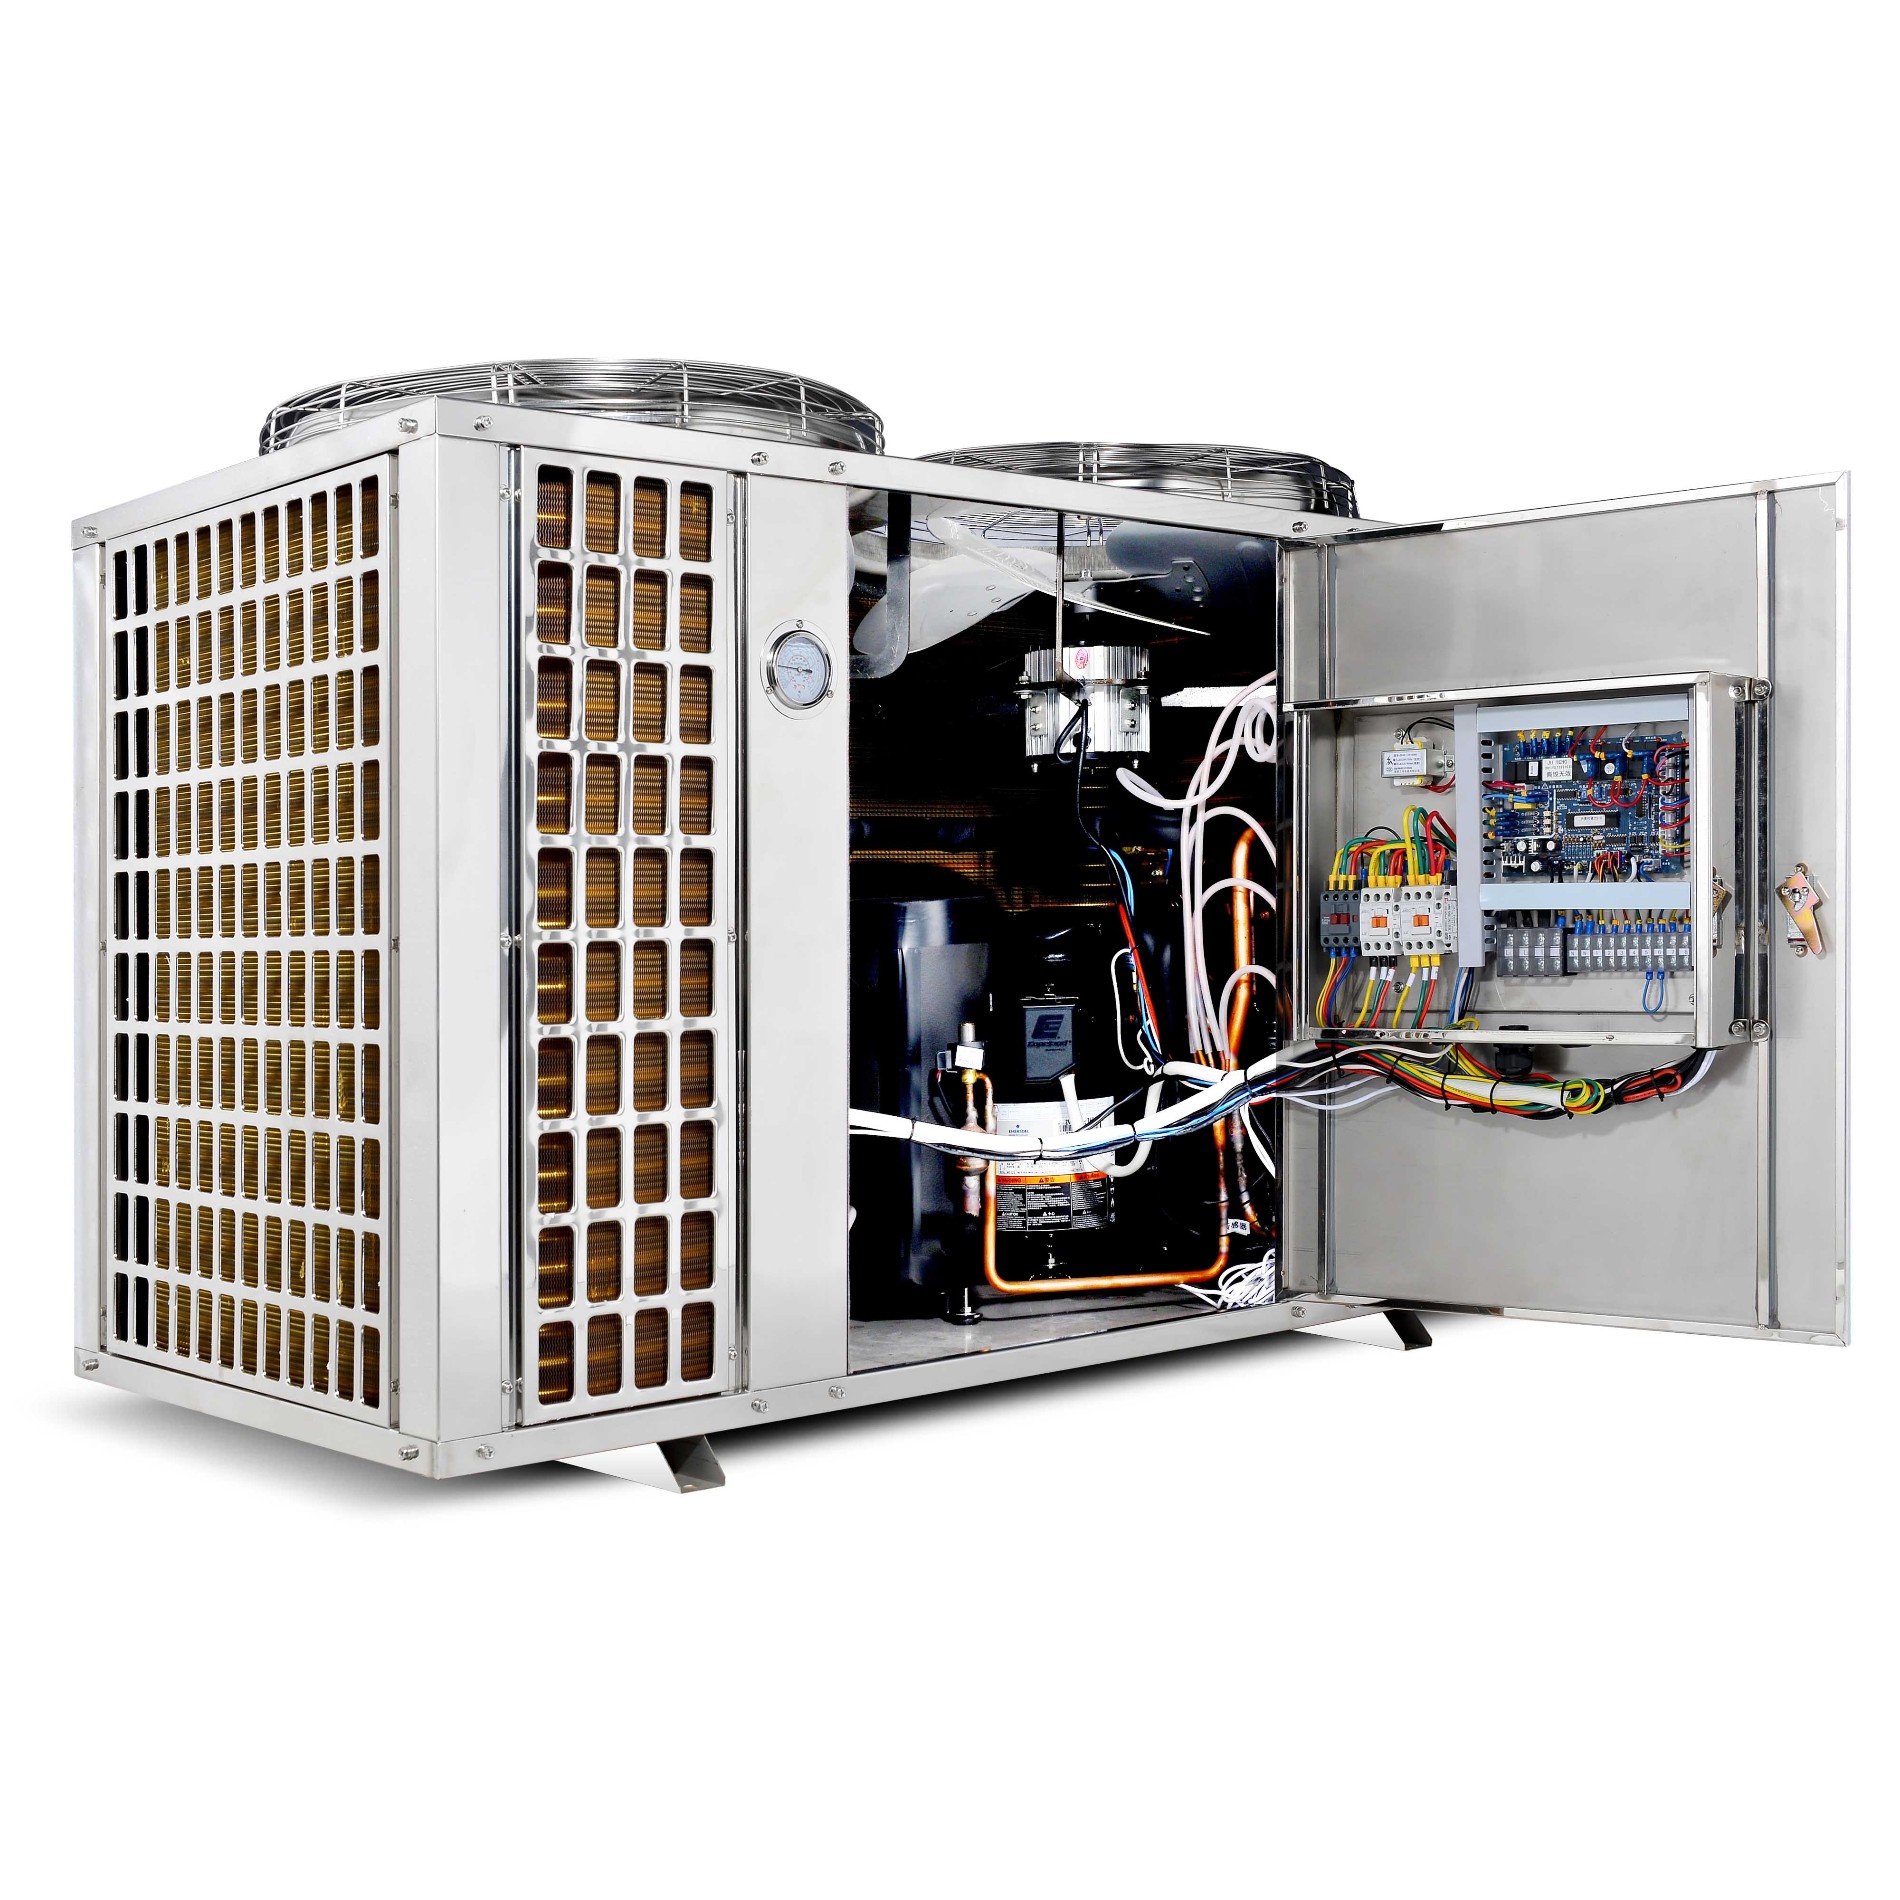 High quality energy saving techology  Cooling And Free Hot Water Quotes,China heat pump equipment Cooling And Free Hot Water Factory, pump equipmentCooling And Free Hot Water Purchasing